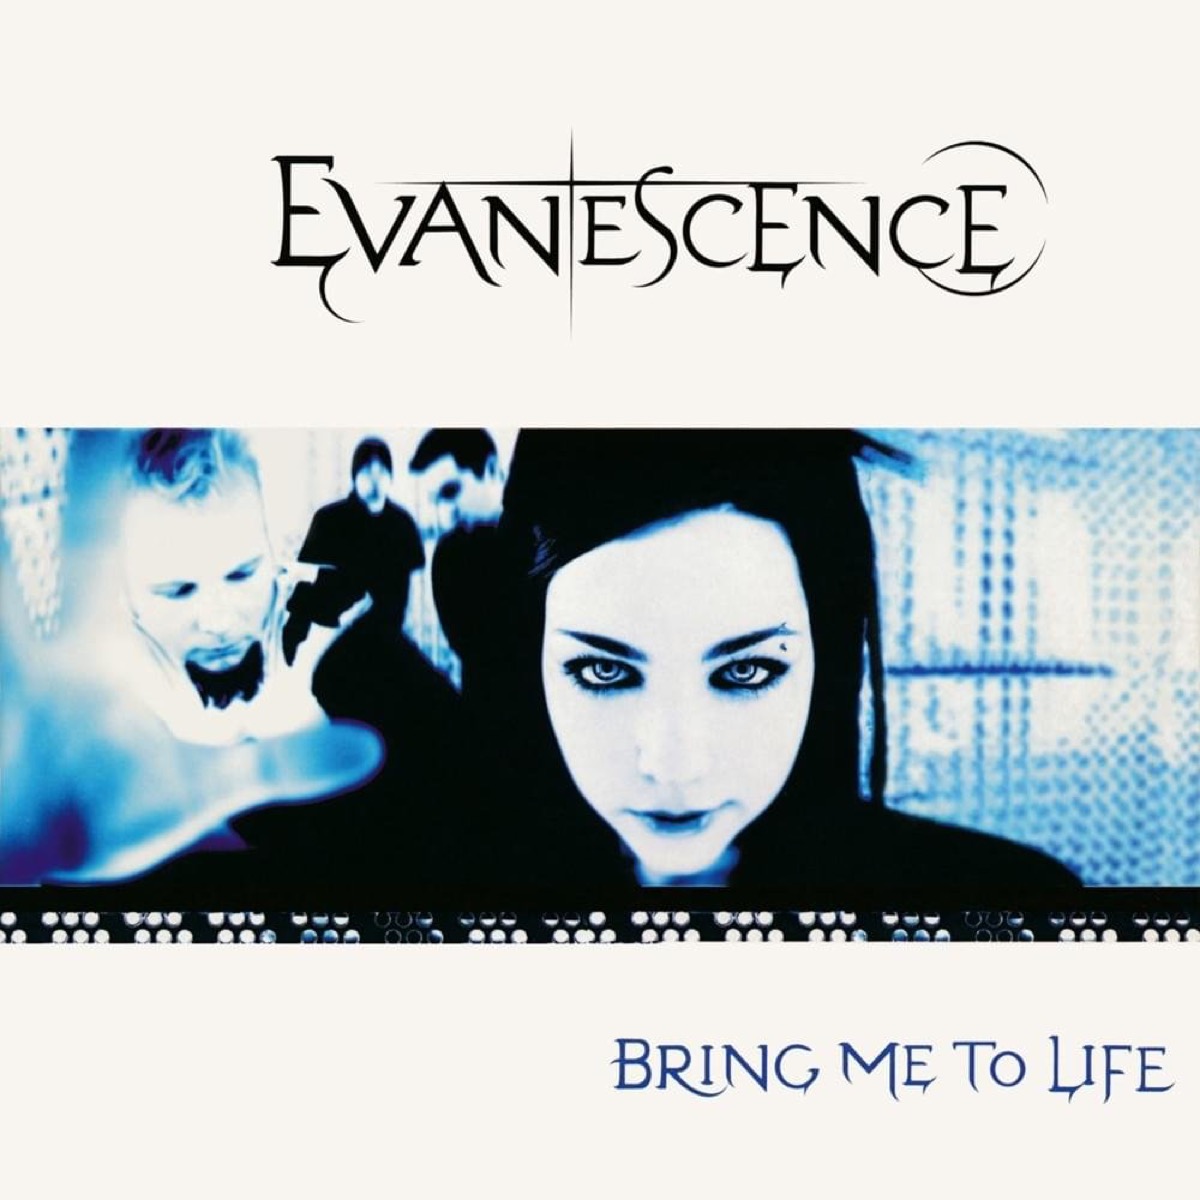 Single cover art for "Bring Me to Life" by Evanescence